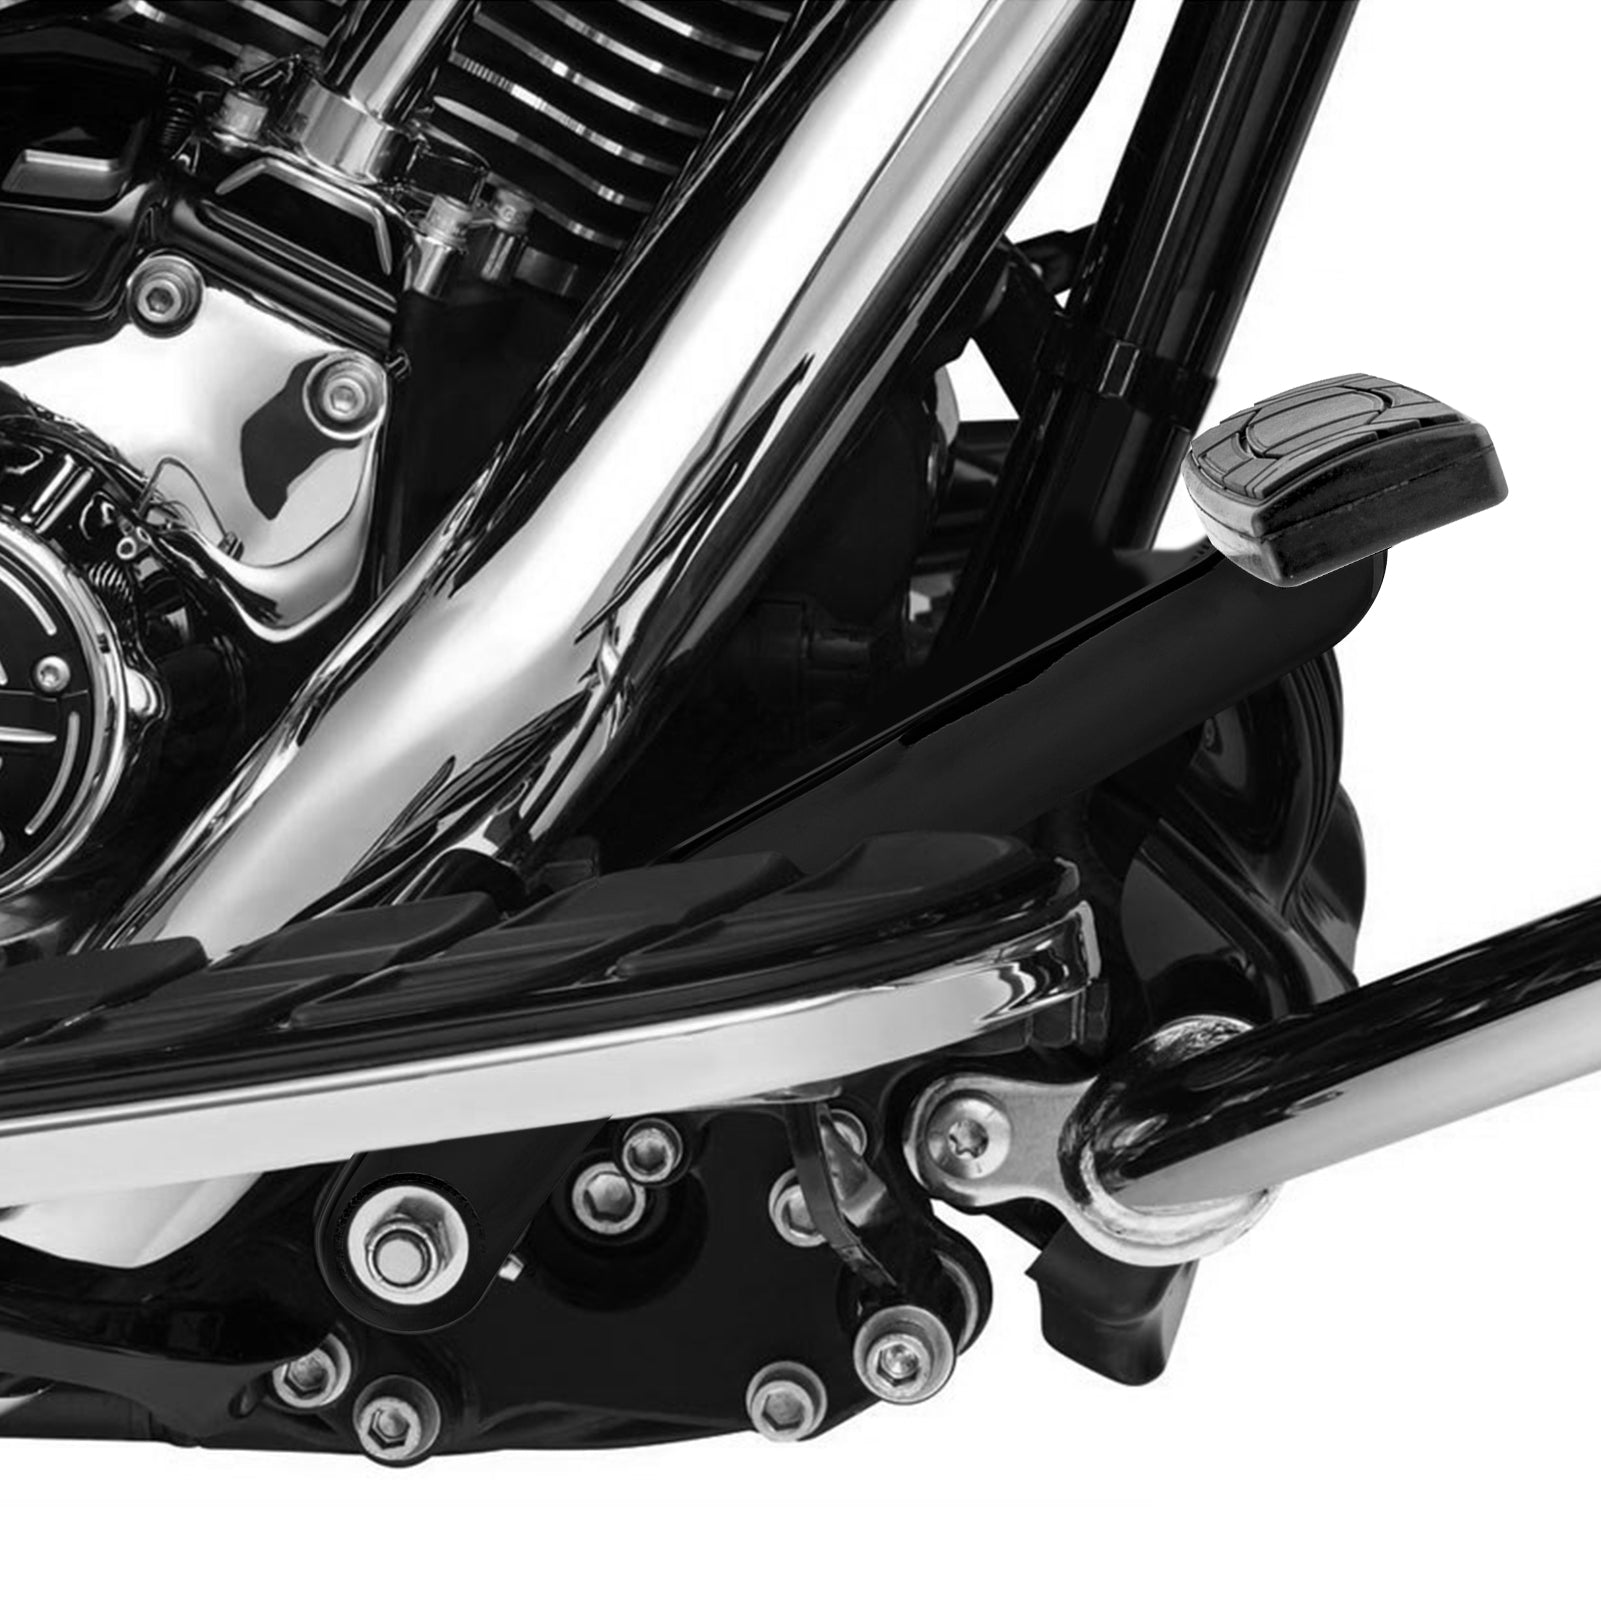 2014-2023 Harley Electra Glide Road Glide Road King Without Fairing Lowers Gloss Black Steel Rear Brake Pedals